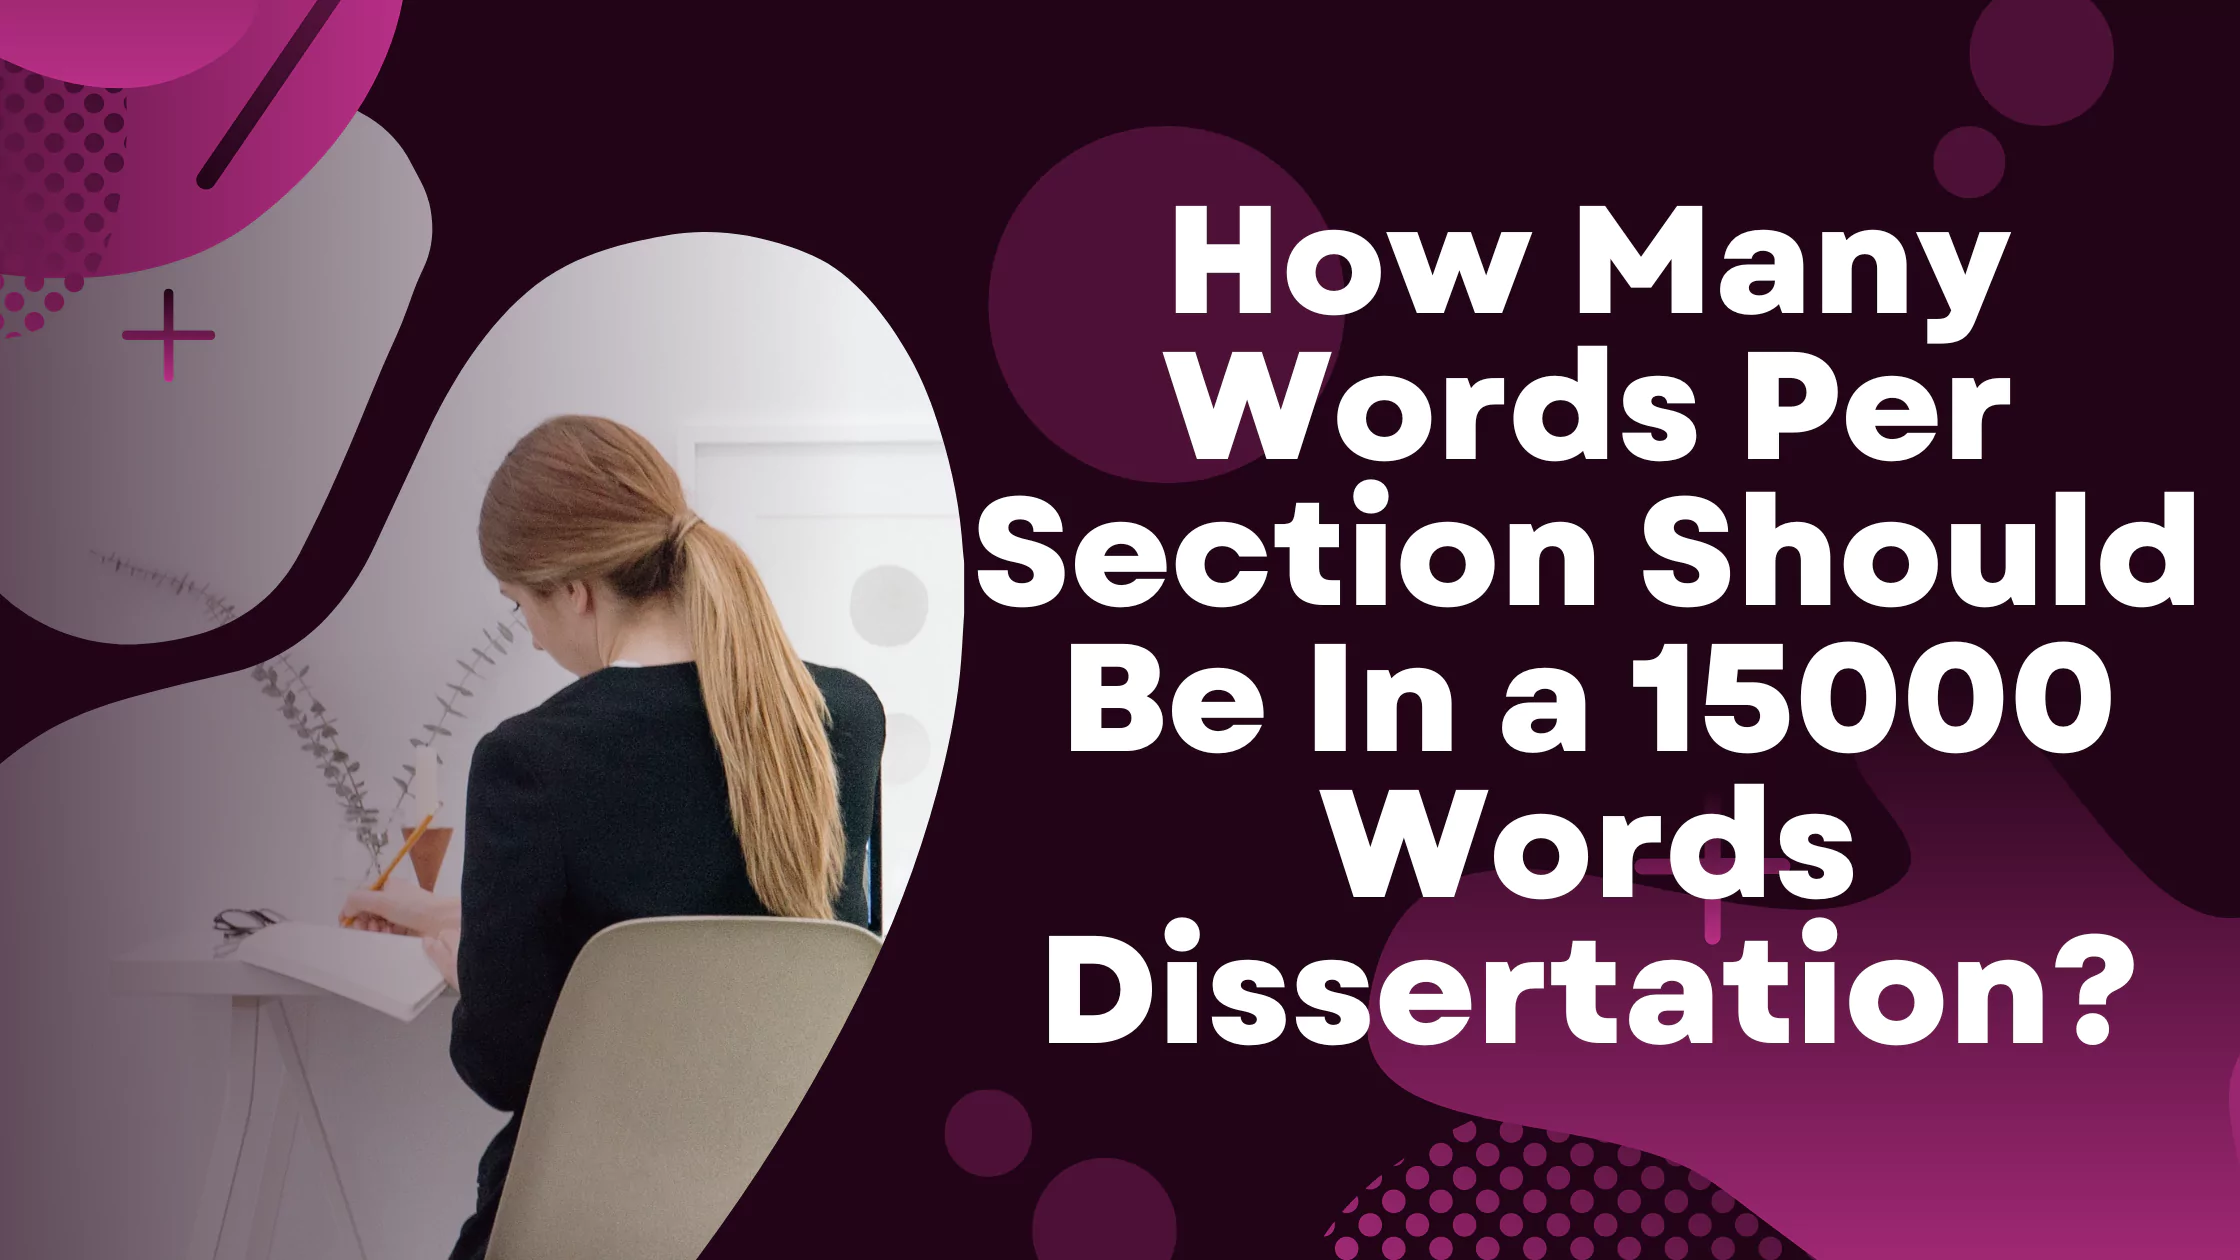 how many words are dissertations